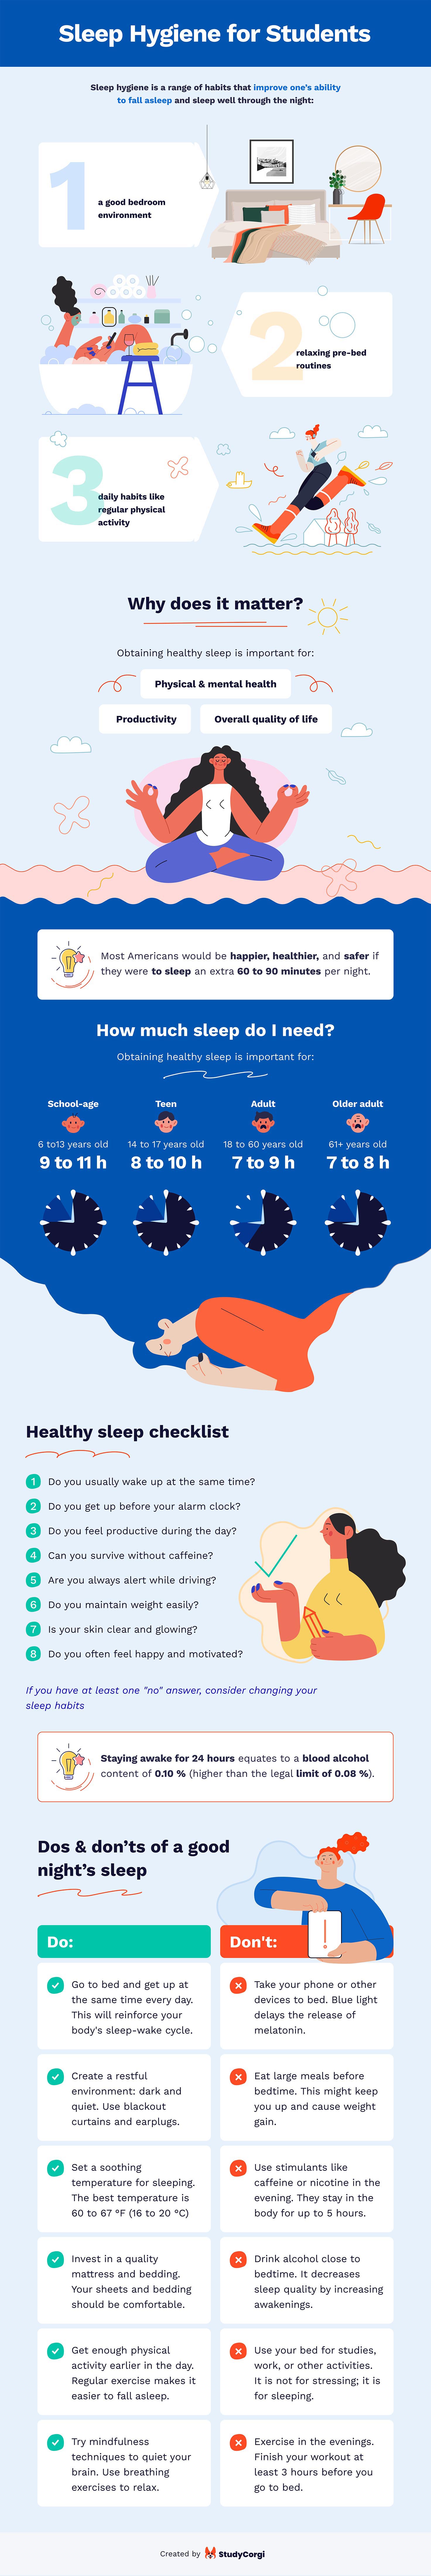 The infographic explains what sleep hygiene is and lists the tips for good sleeping habits.